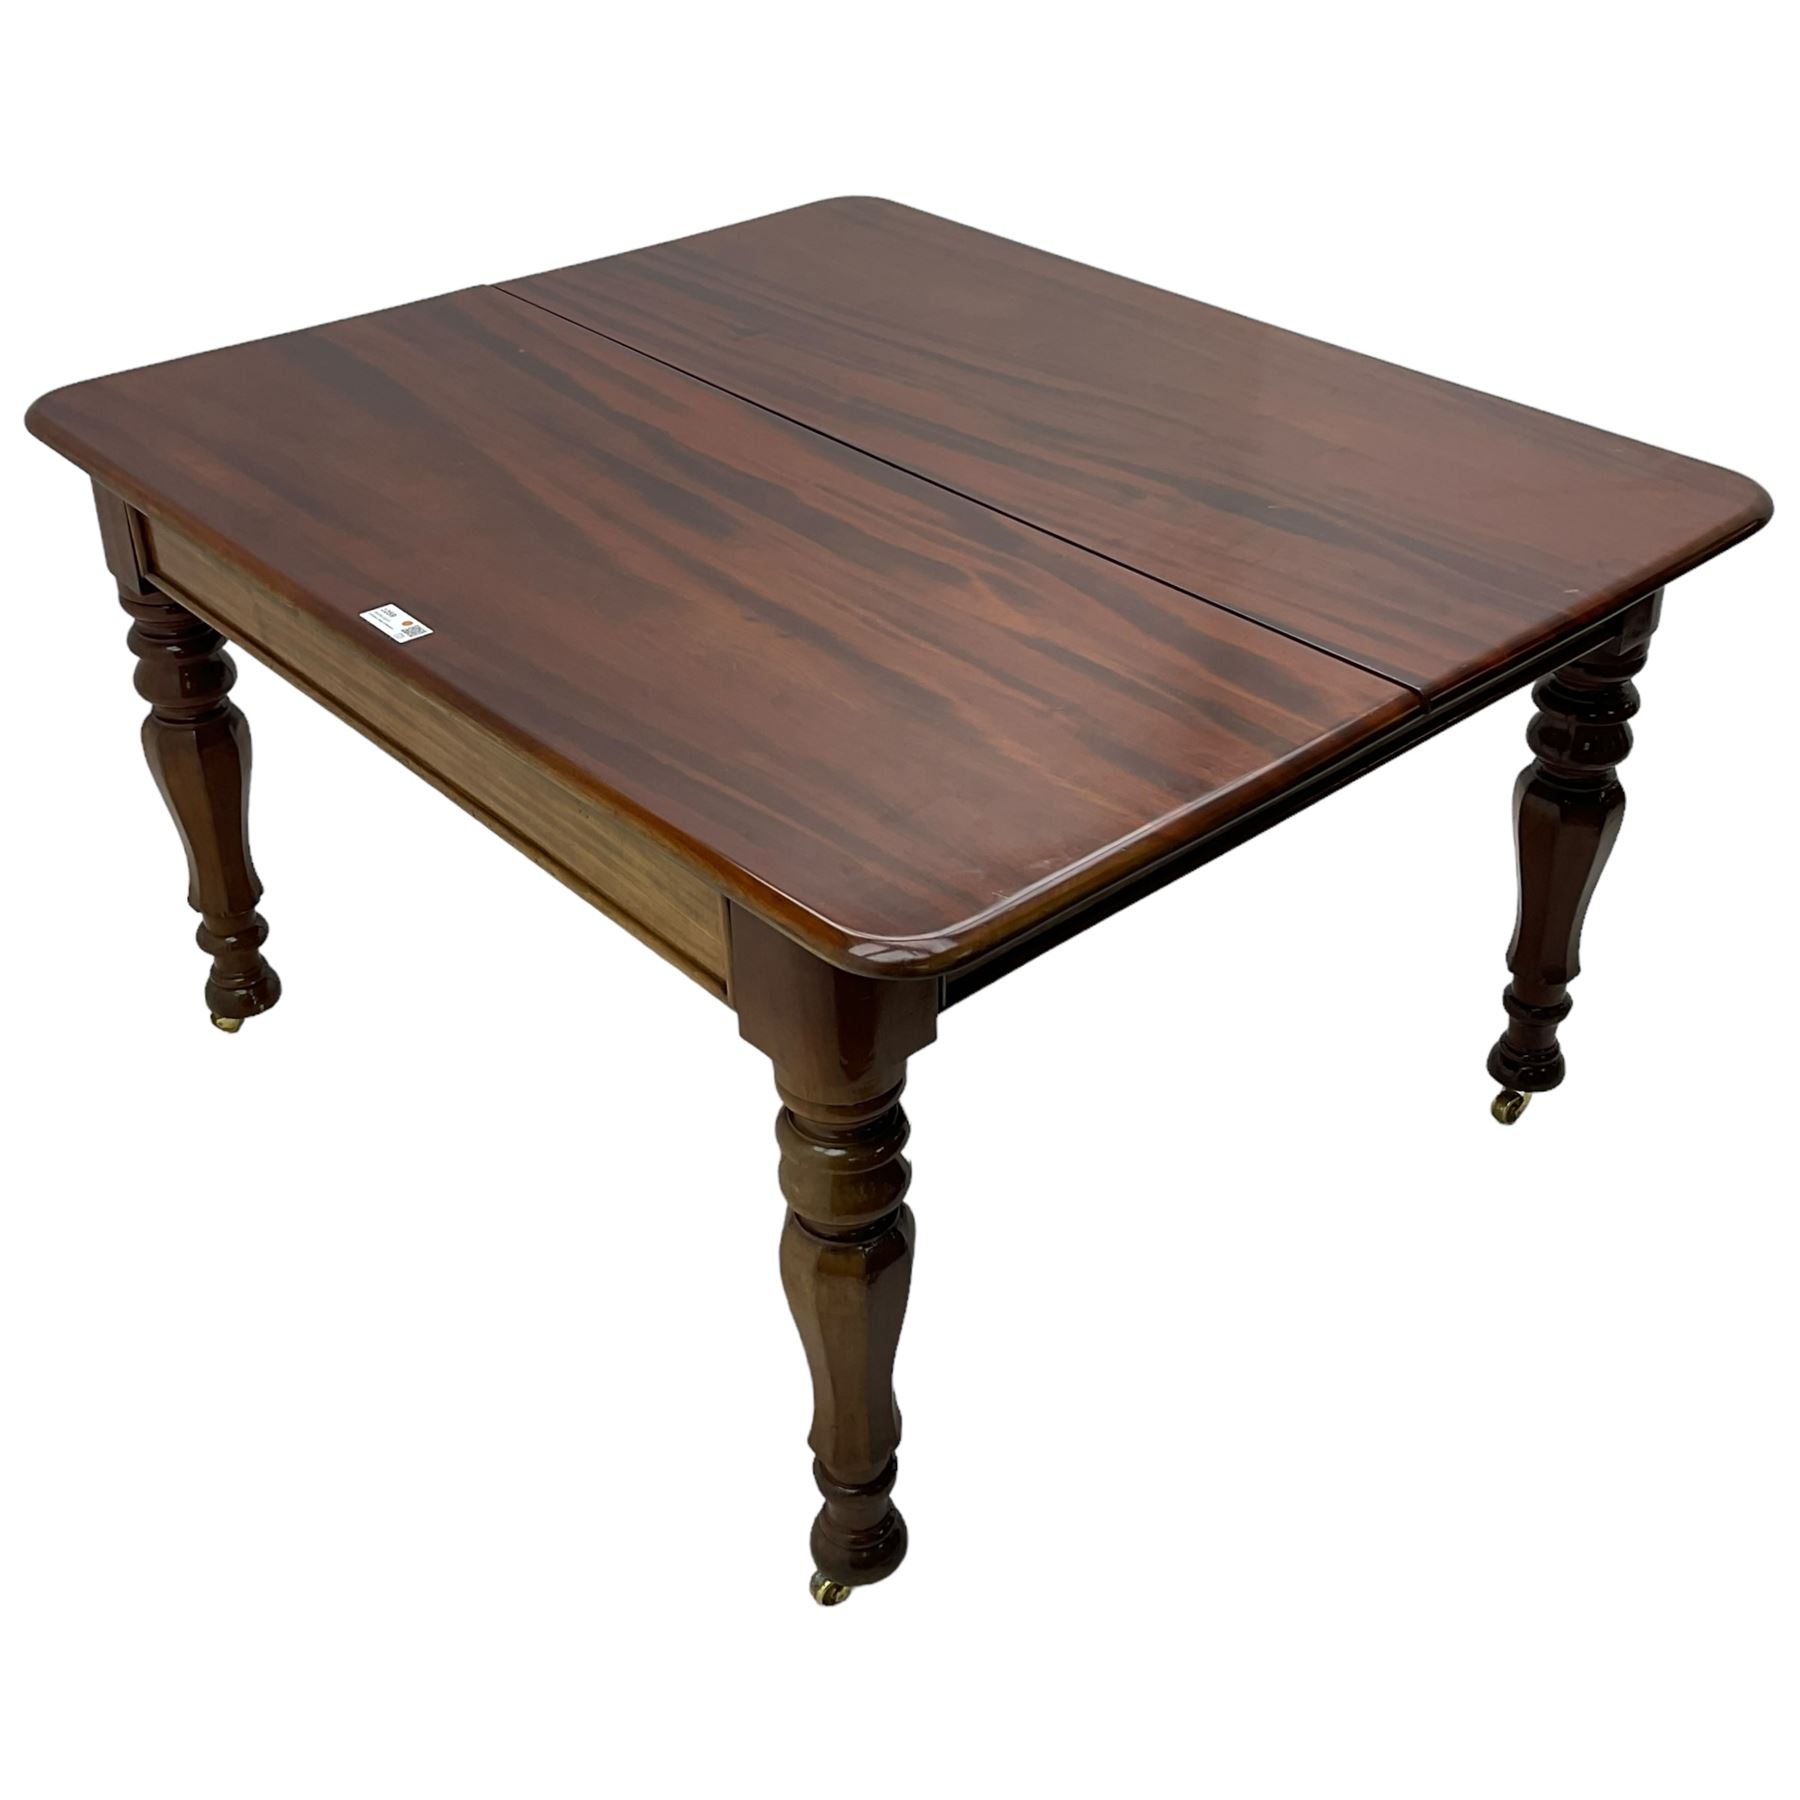 19th century mahogany extending dining table with three additional leaves - Image 9 of 15